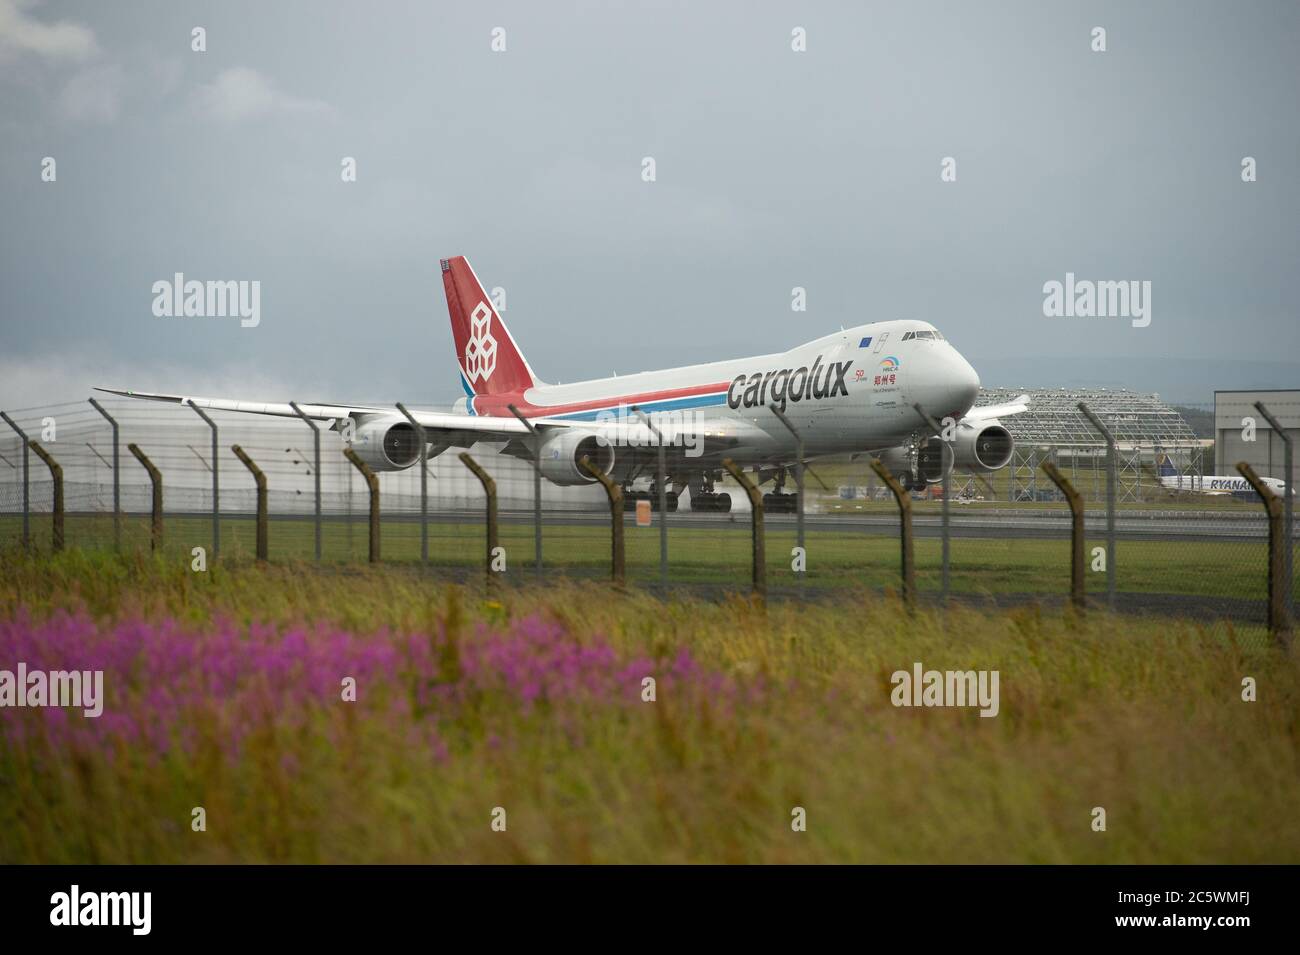 Prestwick, Scotland, UK. 5th July, 2020. Pictured: Cargolux Boeing 747-8R7F Jumbo Jet Air Freighter (reg LX-VCJ) seen taking off on a very wet and windy runway from Glasgow Prestwick International Airport bound for Luxembourg with a payload of air freight. Credit: Colin Fisher/Alamy Live News Stock Photo